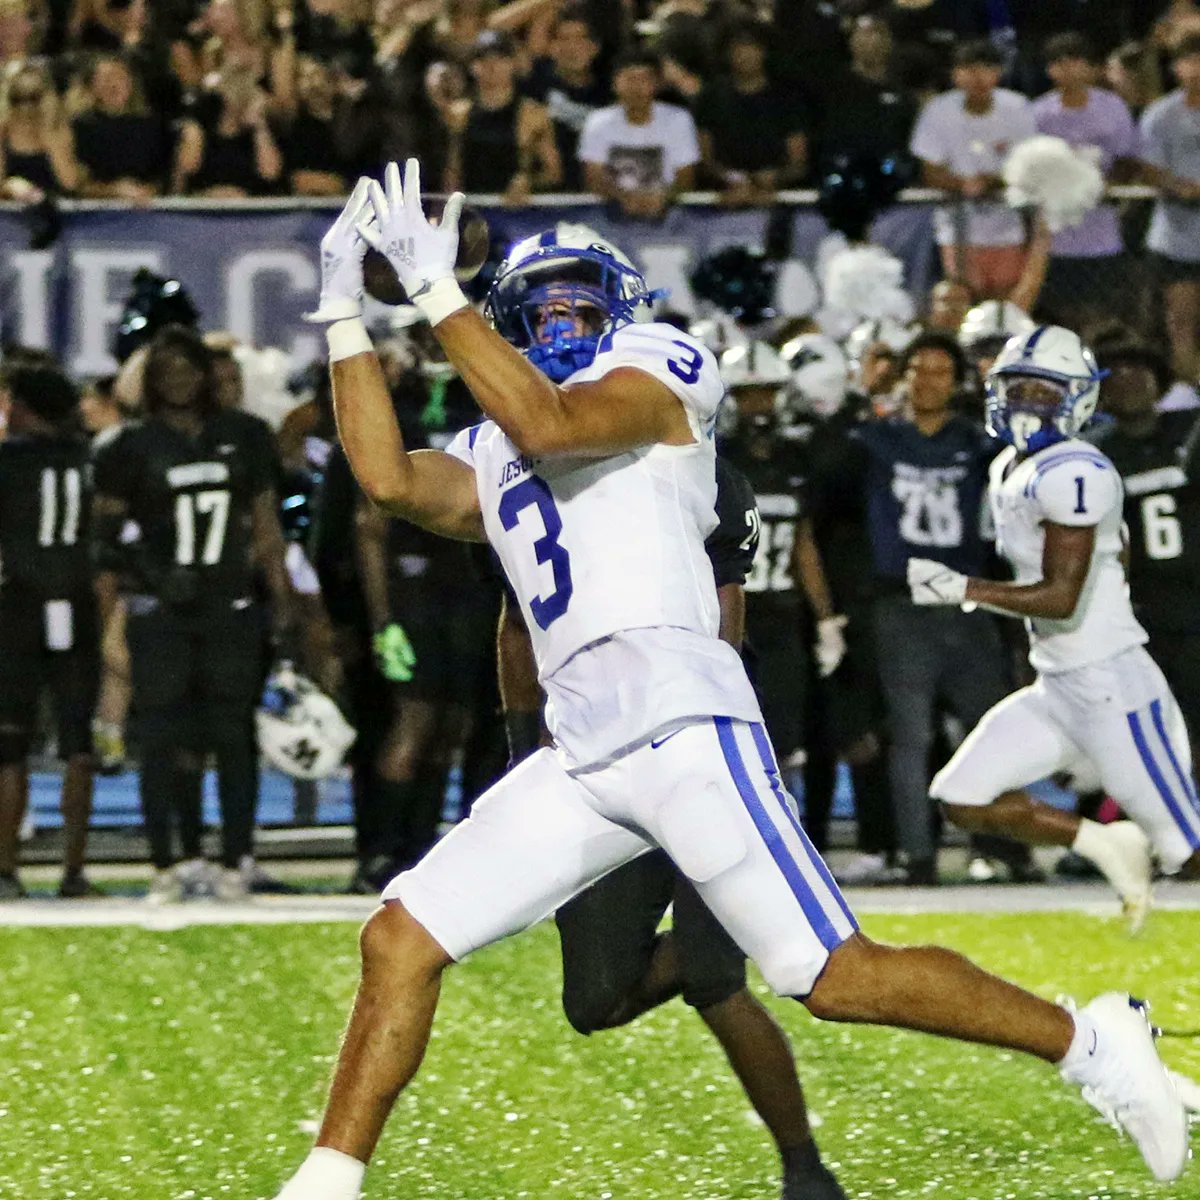 The Jesuit vs. Leto football game originally scheduled for Friday now will be played Monday at 7:00pm at Corral Memoral Stadium. #AMDG l #GoTigers l #JesuitFootball